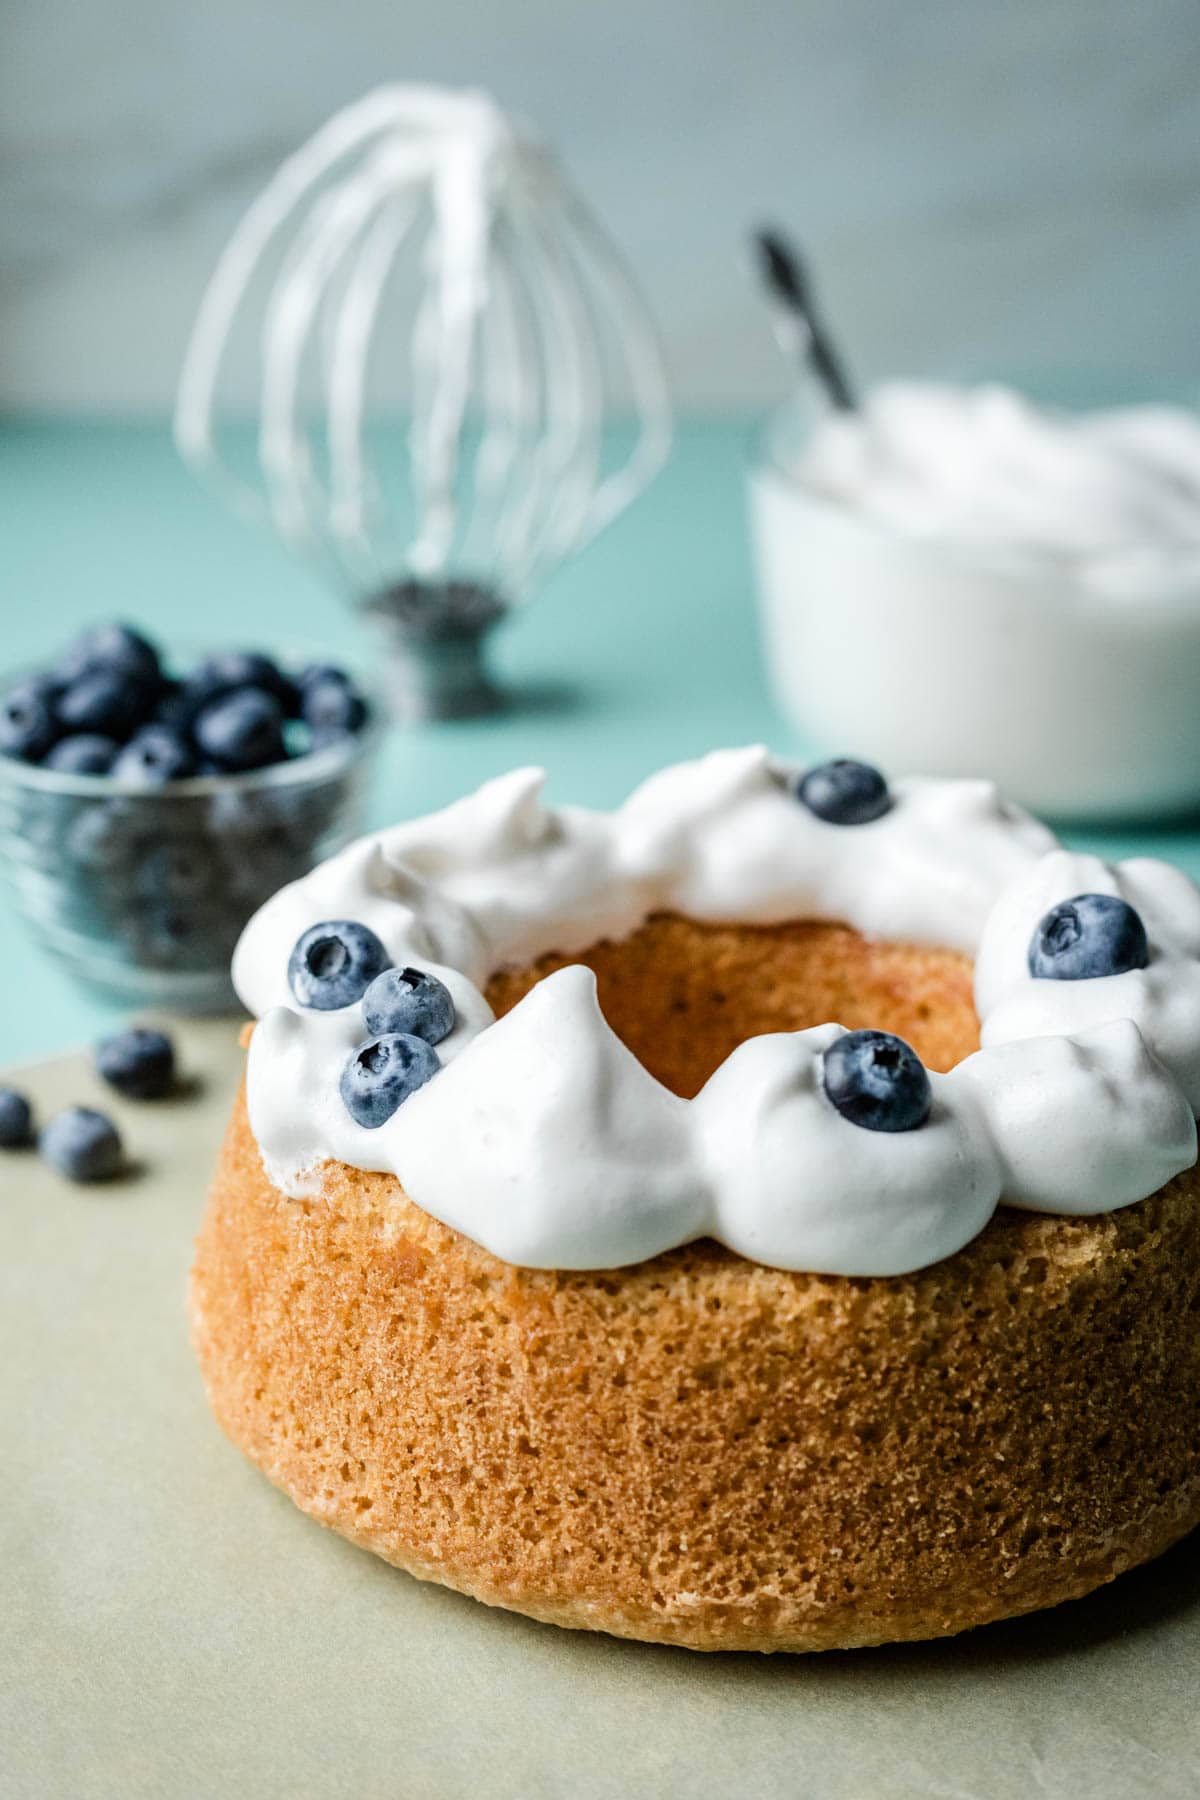 Vegan whipped cream dolloped on top of angel food cake with blueberries.